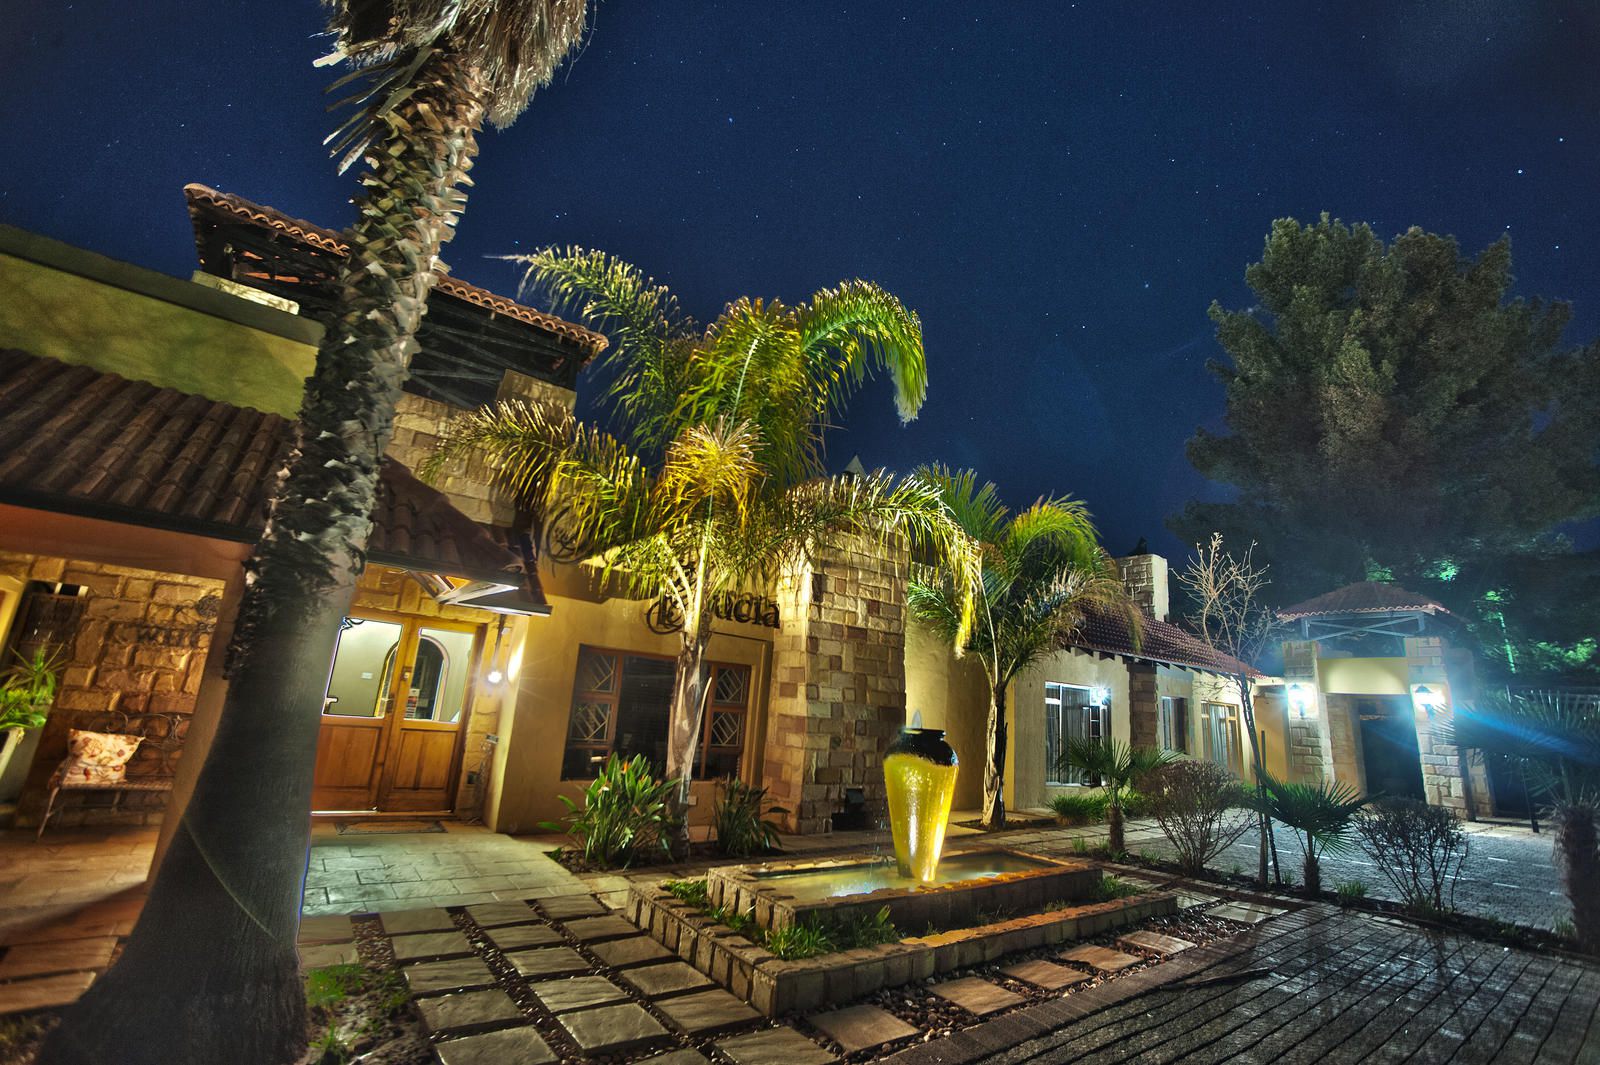 Solo Gracia Brandwag Bloemfontein Free State South Africa House, Building, Architecture, Palm Tree, Plant, Nature, Wood, Night Sky, Swimming Pool